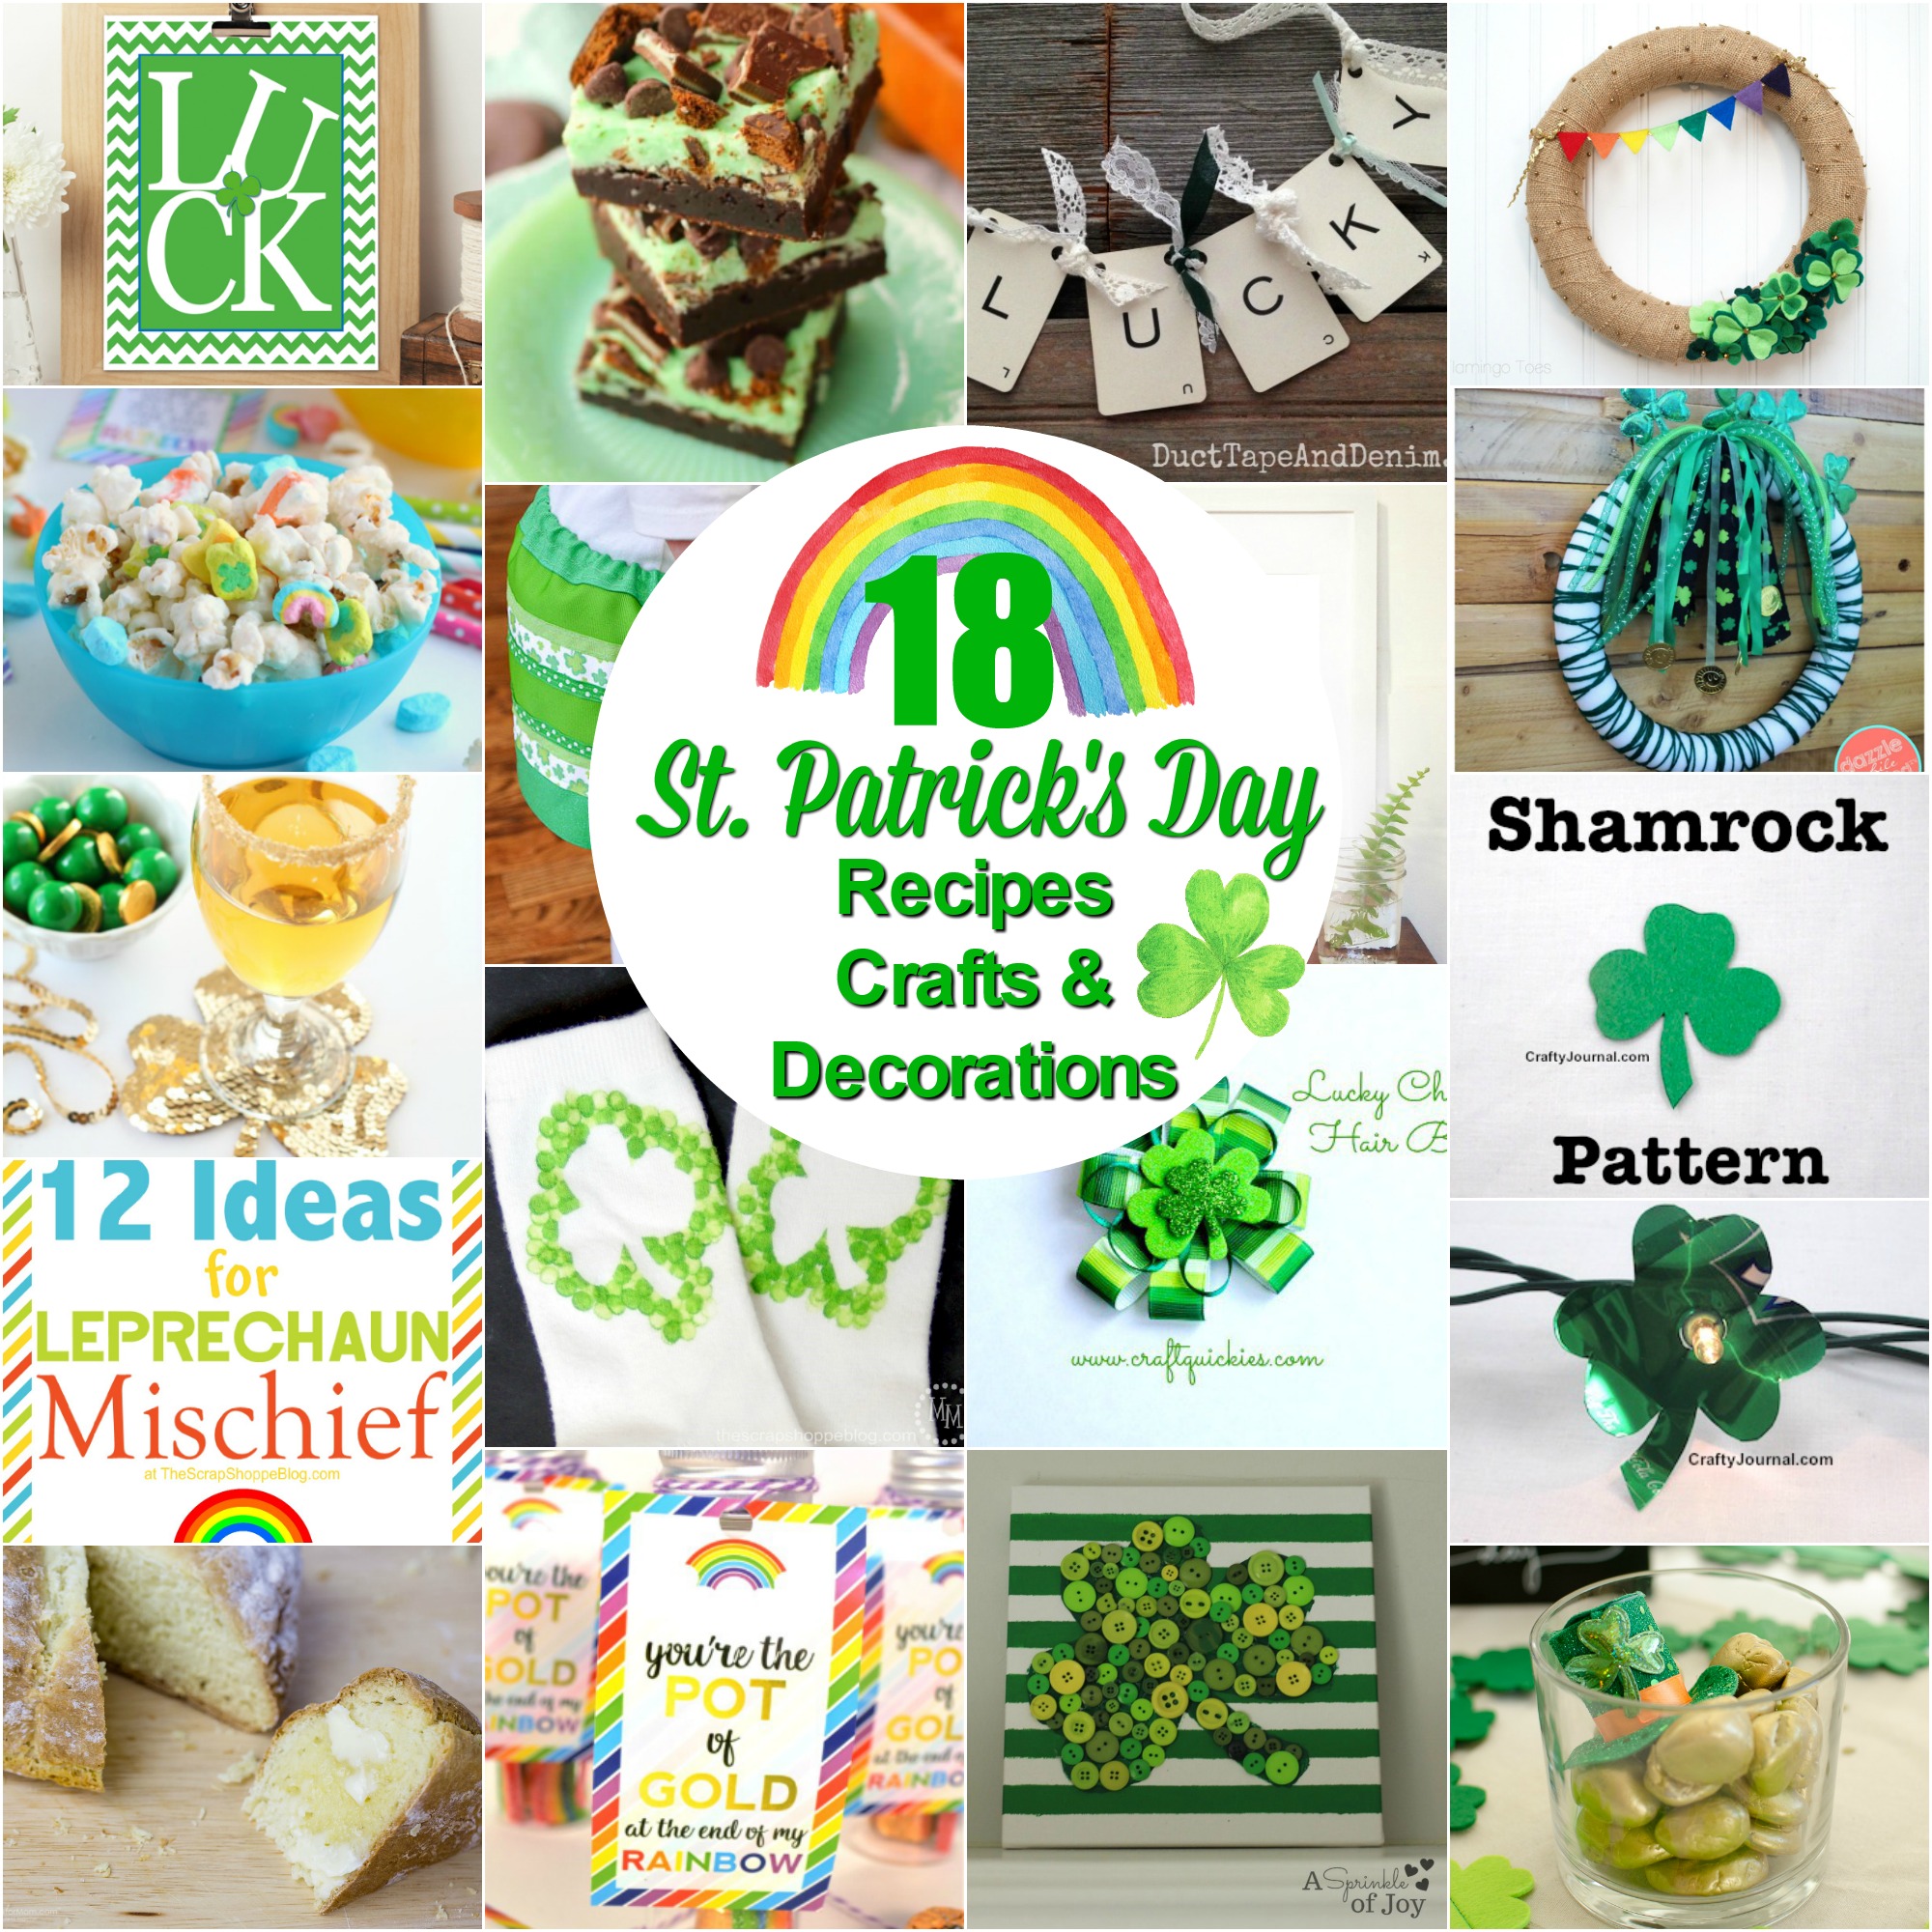 18 St. Patrick's Day Recipes, Crafts, and Decorations